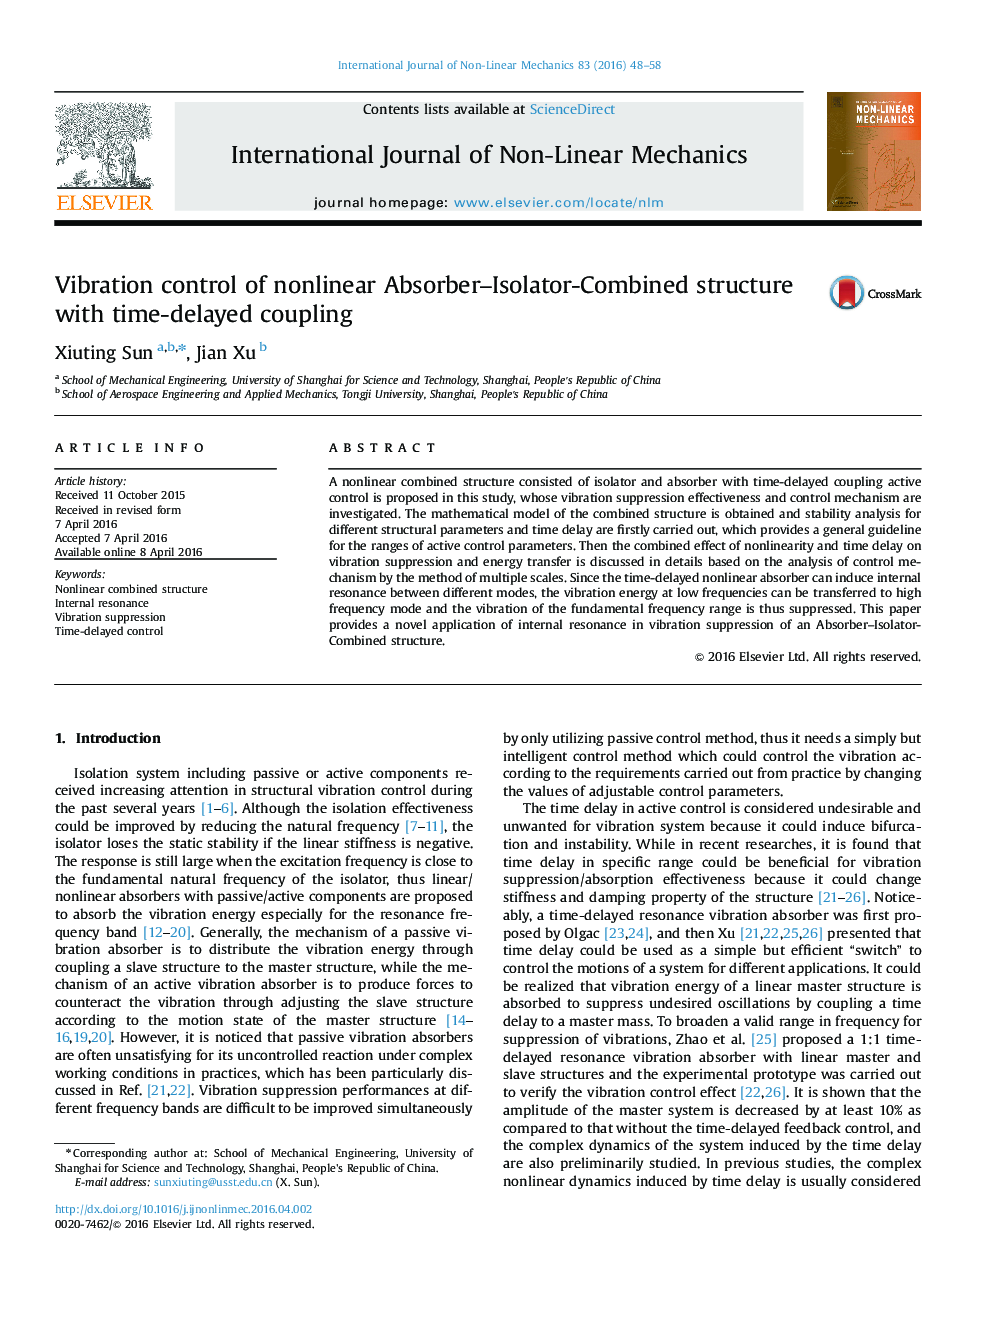 Vibration control of nonlinear Absorber–Isolator-Combined structure with time-delayed coupling